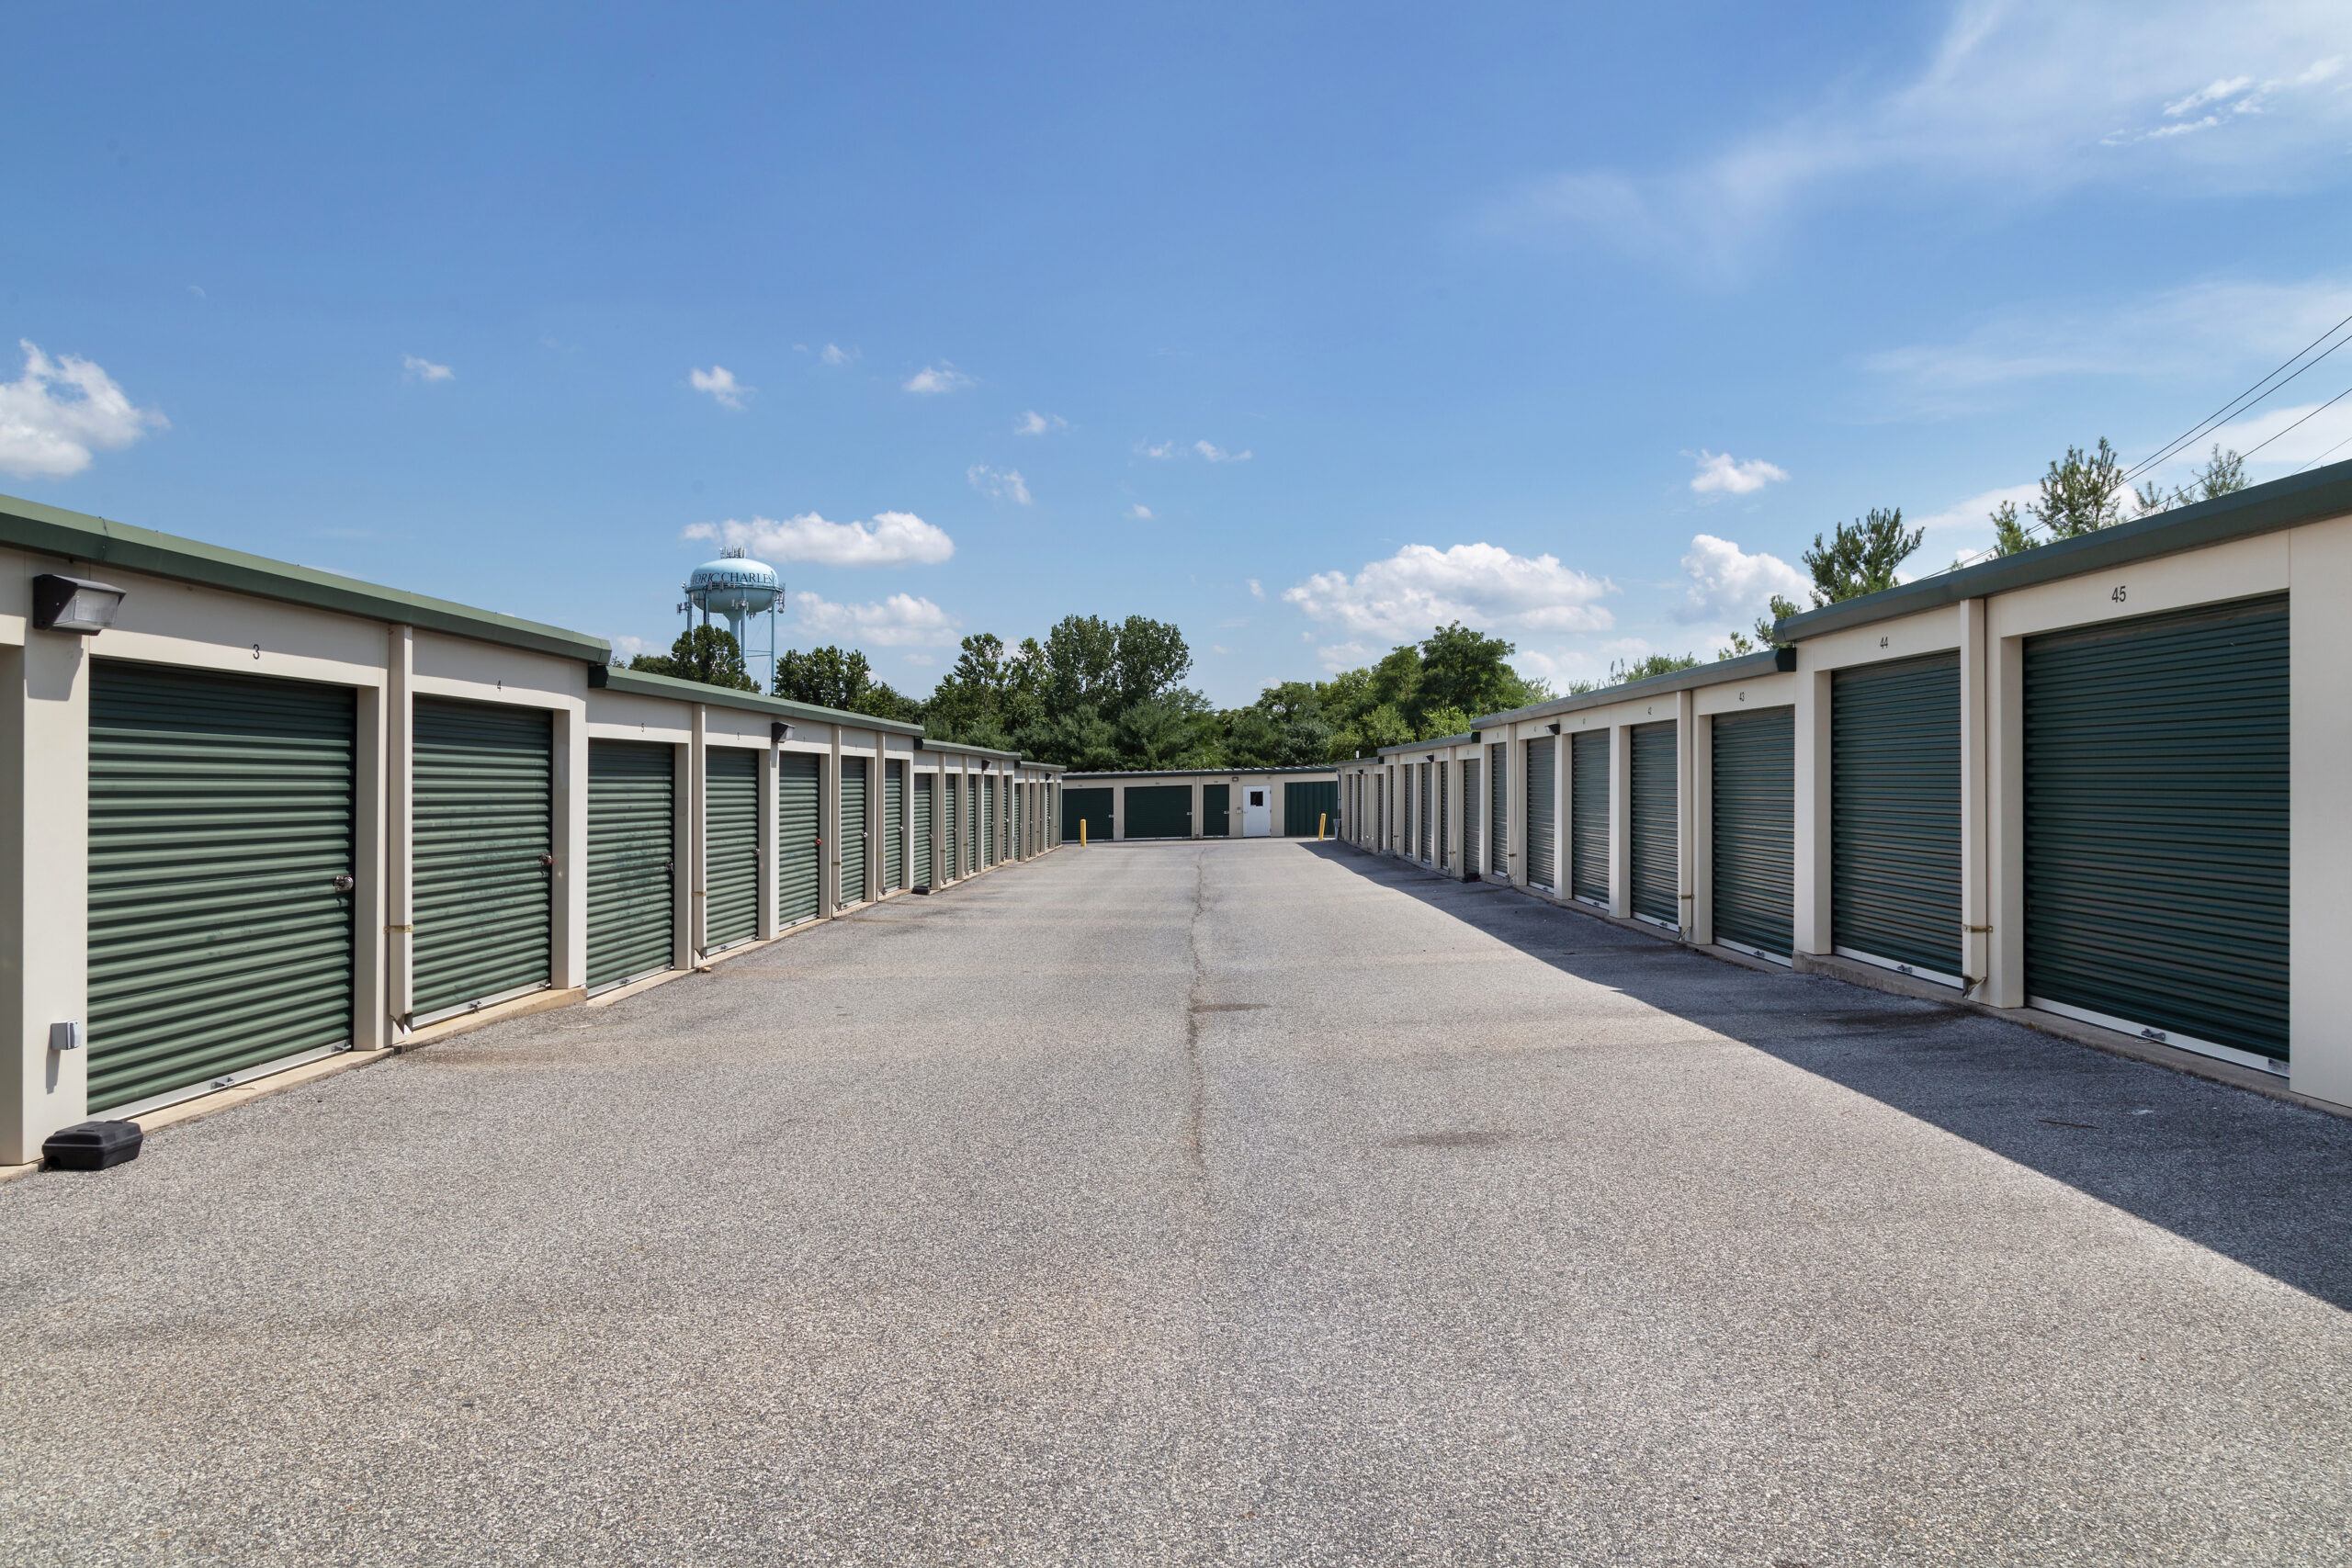 Drive-up units at Self Storage Plus in Charles Town.